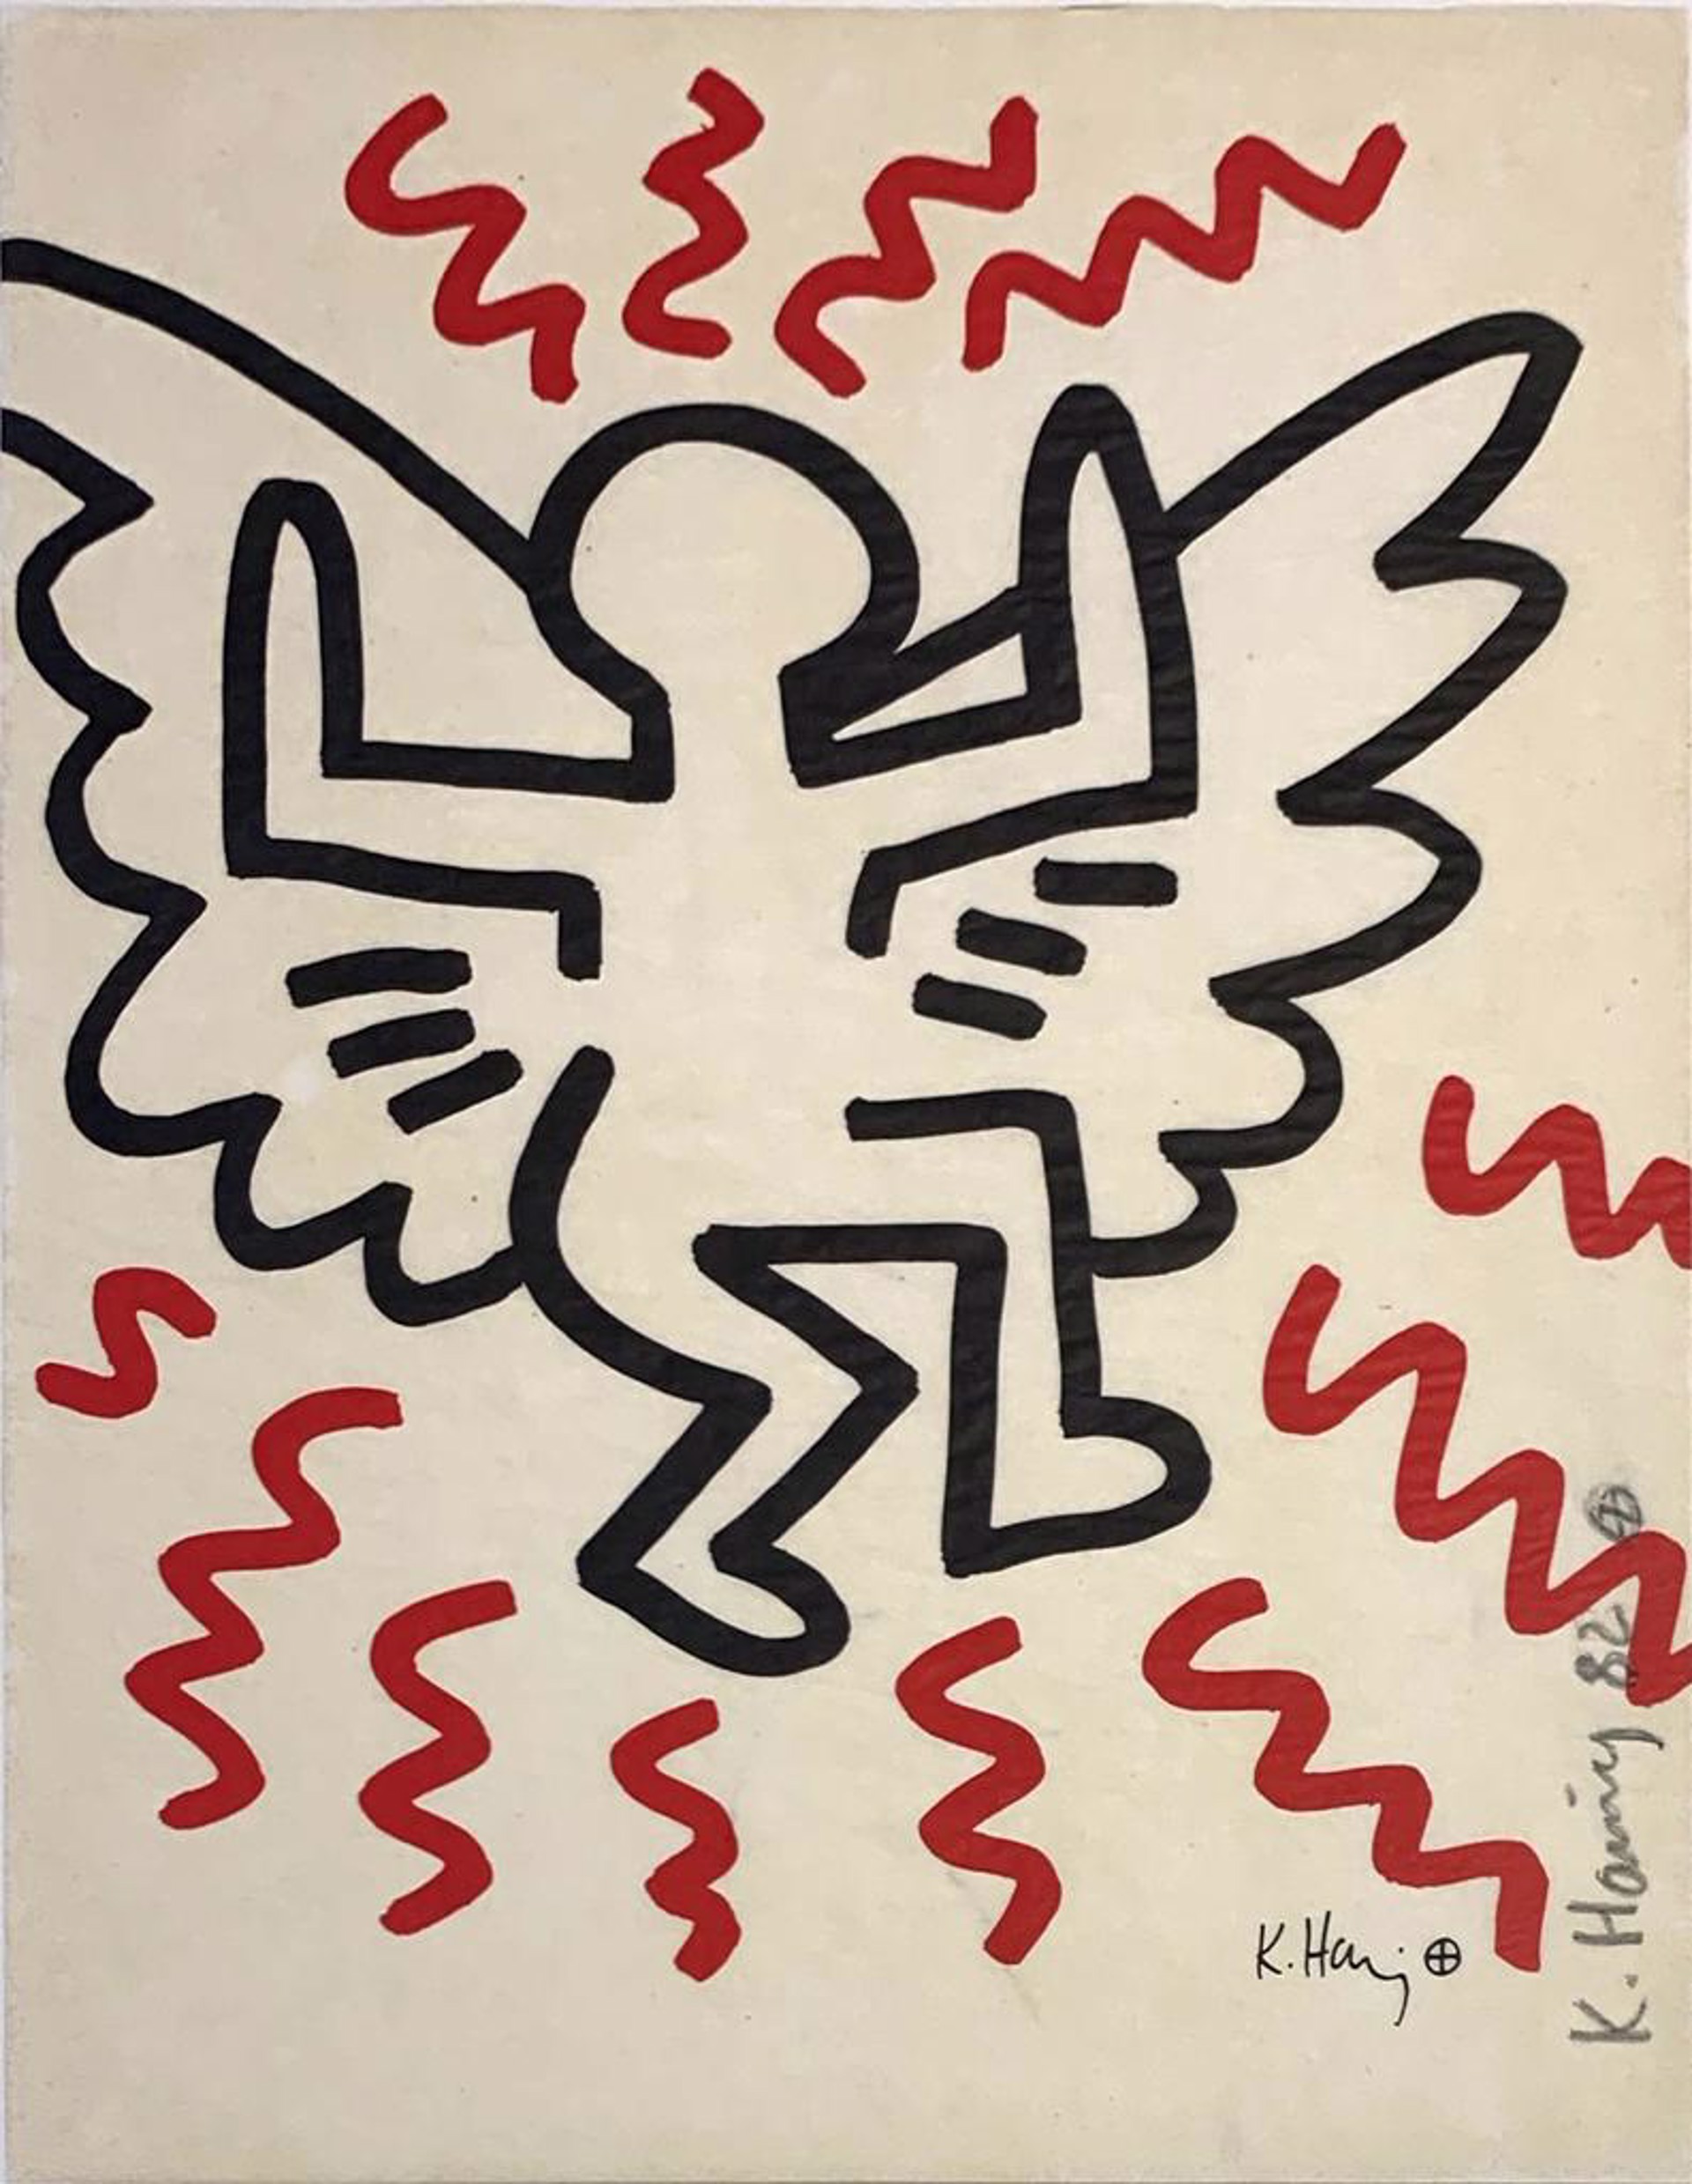 Bayer Suite #3 by Keith Haring